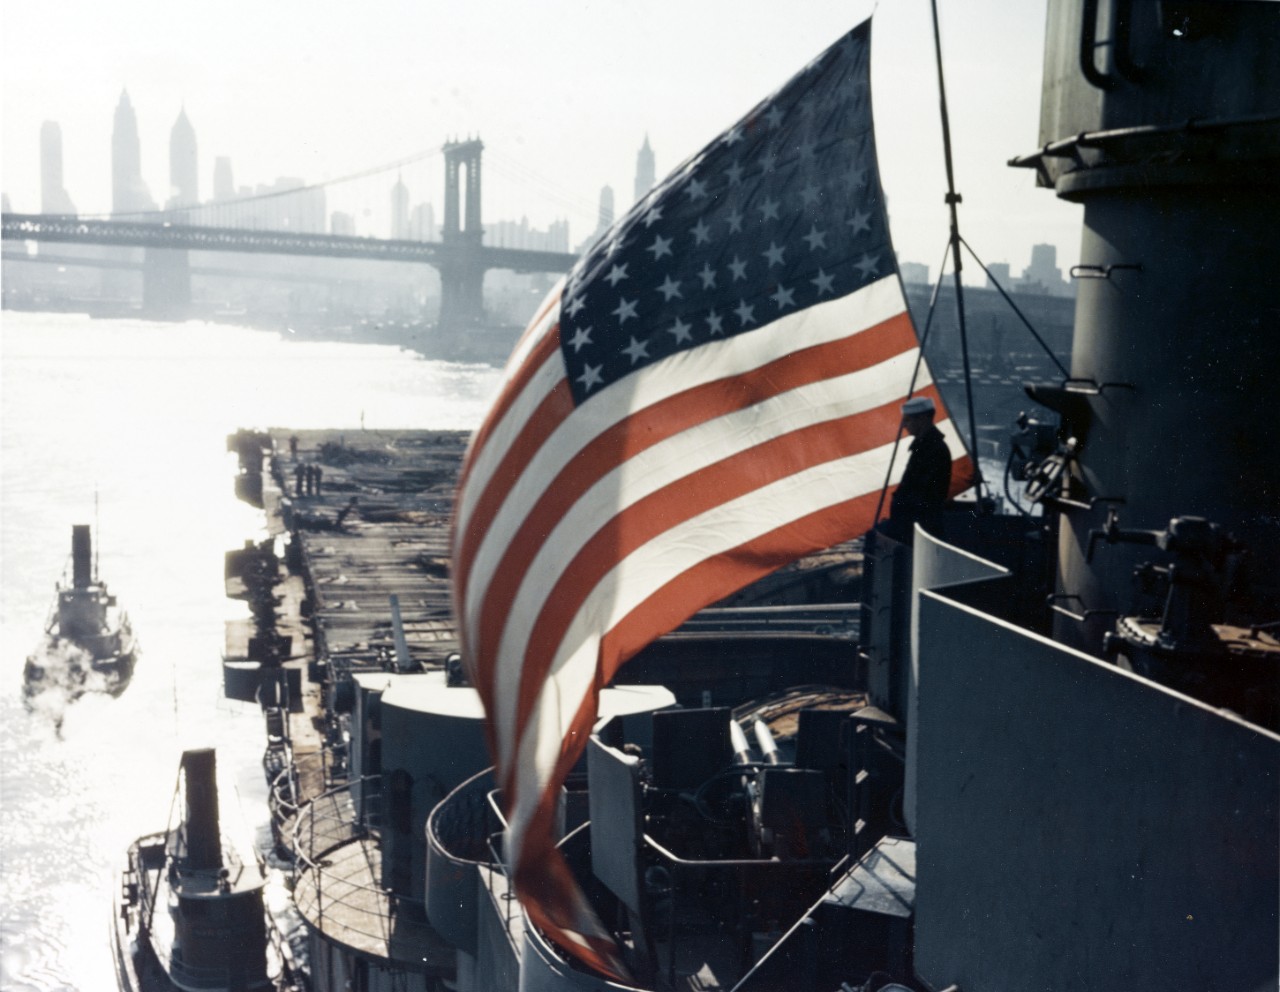 <div class=" cq-static cq-static-small cq-static-right" id="ext-comp-7809">80-G-K-6065 USS FRANKLIN (CV-13) arrives at New York Navy Yard for repair of battle damage, circa 28 April 1945</div>
<div style="left: -10000px; top: 0px; width: 9000px; height: 16px; overflow: hidden; position: absolute;"><div>&nbsp;</div>
</div>
